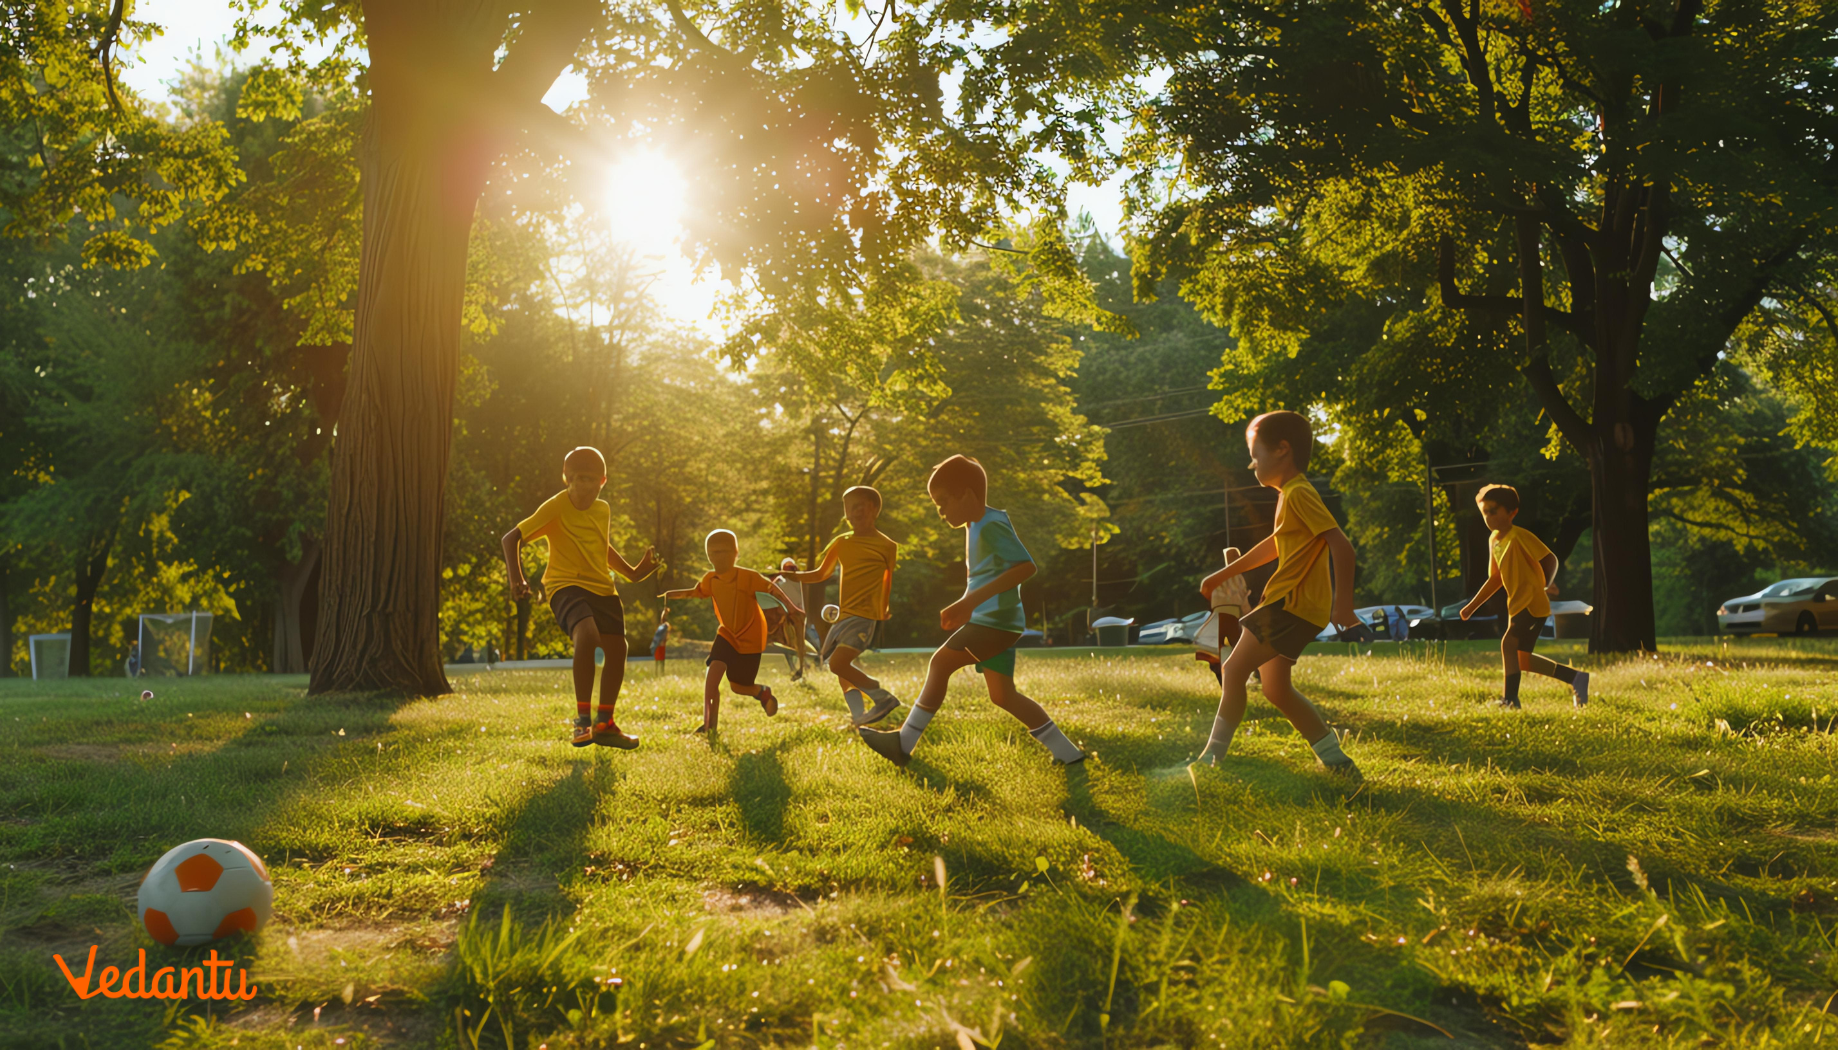 Simple List of 20+ Summer Outdoor Activities for Kids and Friends